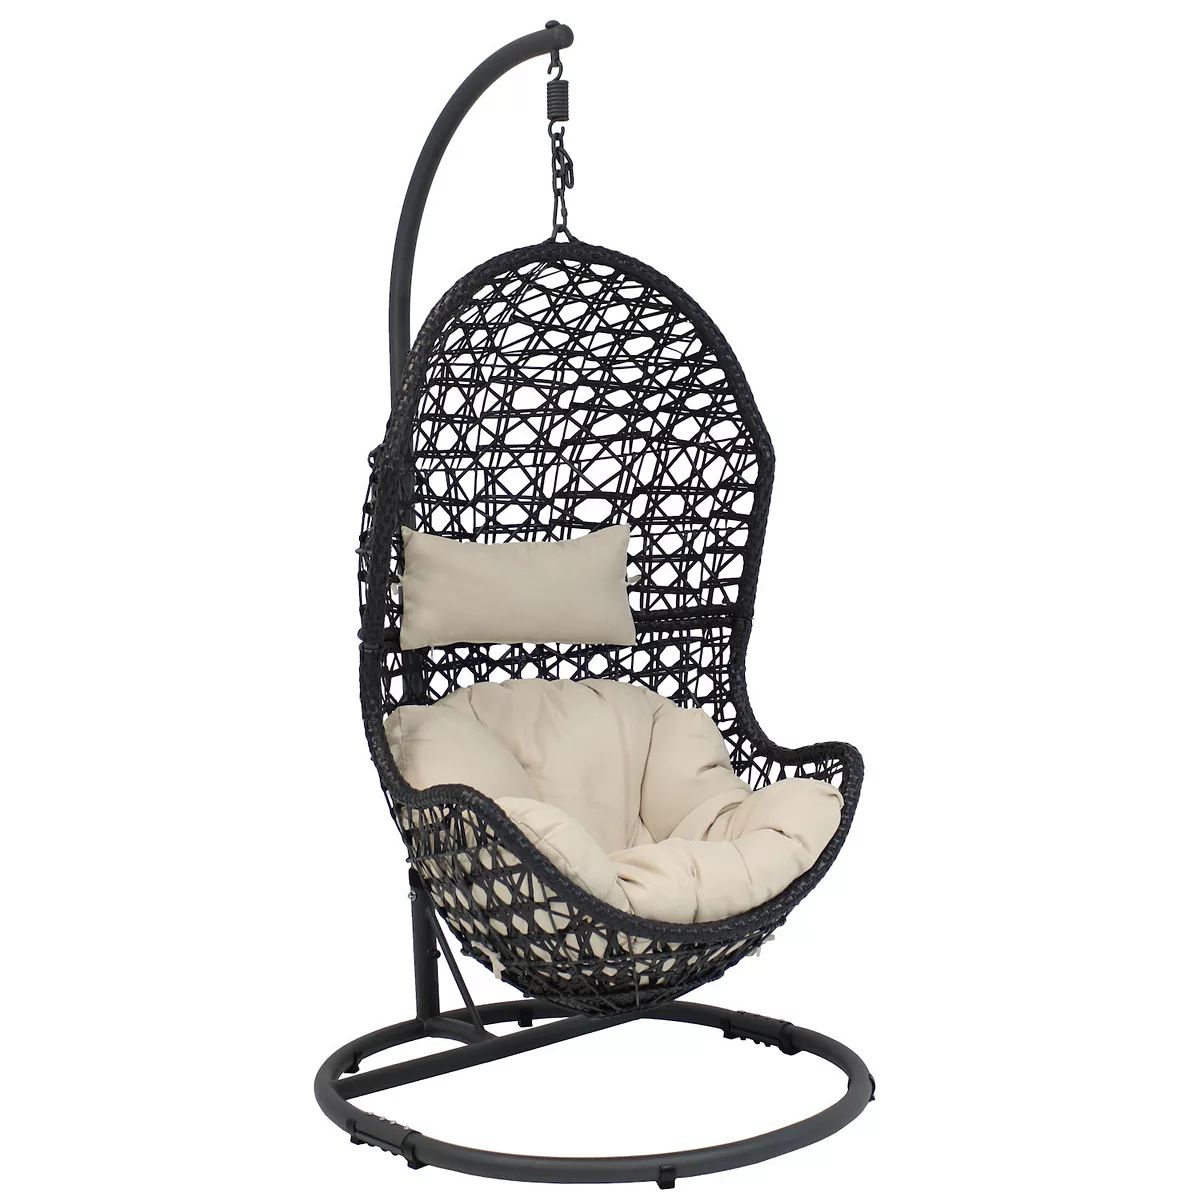 Sunnydaze Resin Wicker Basket Egg Chair with Steel Stand/Cushions - Gray | Kohl's